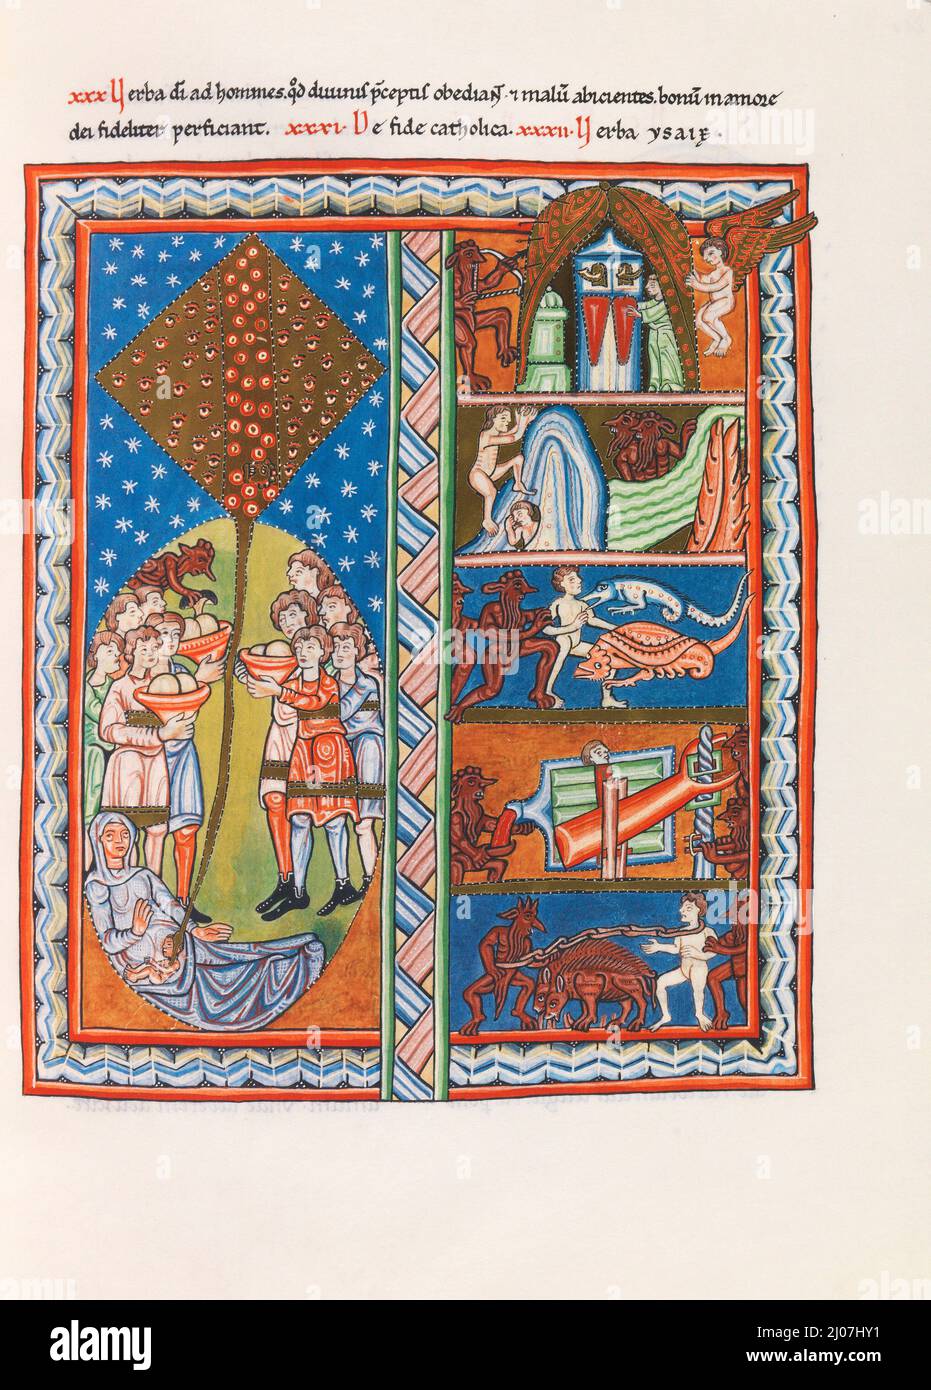 Miniature from Liber Scivias by Hildegard of Bingen. Museum: PRIVATE COLLECTION. Author: ANONYMOUS. Stock Photo